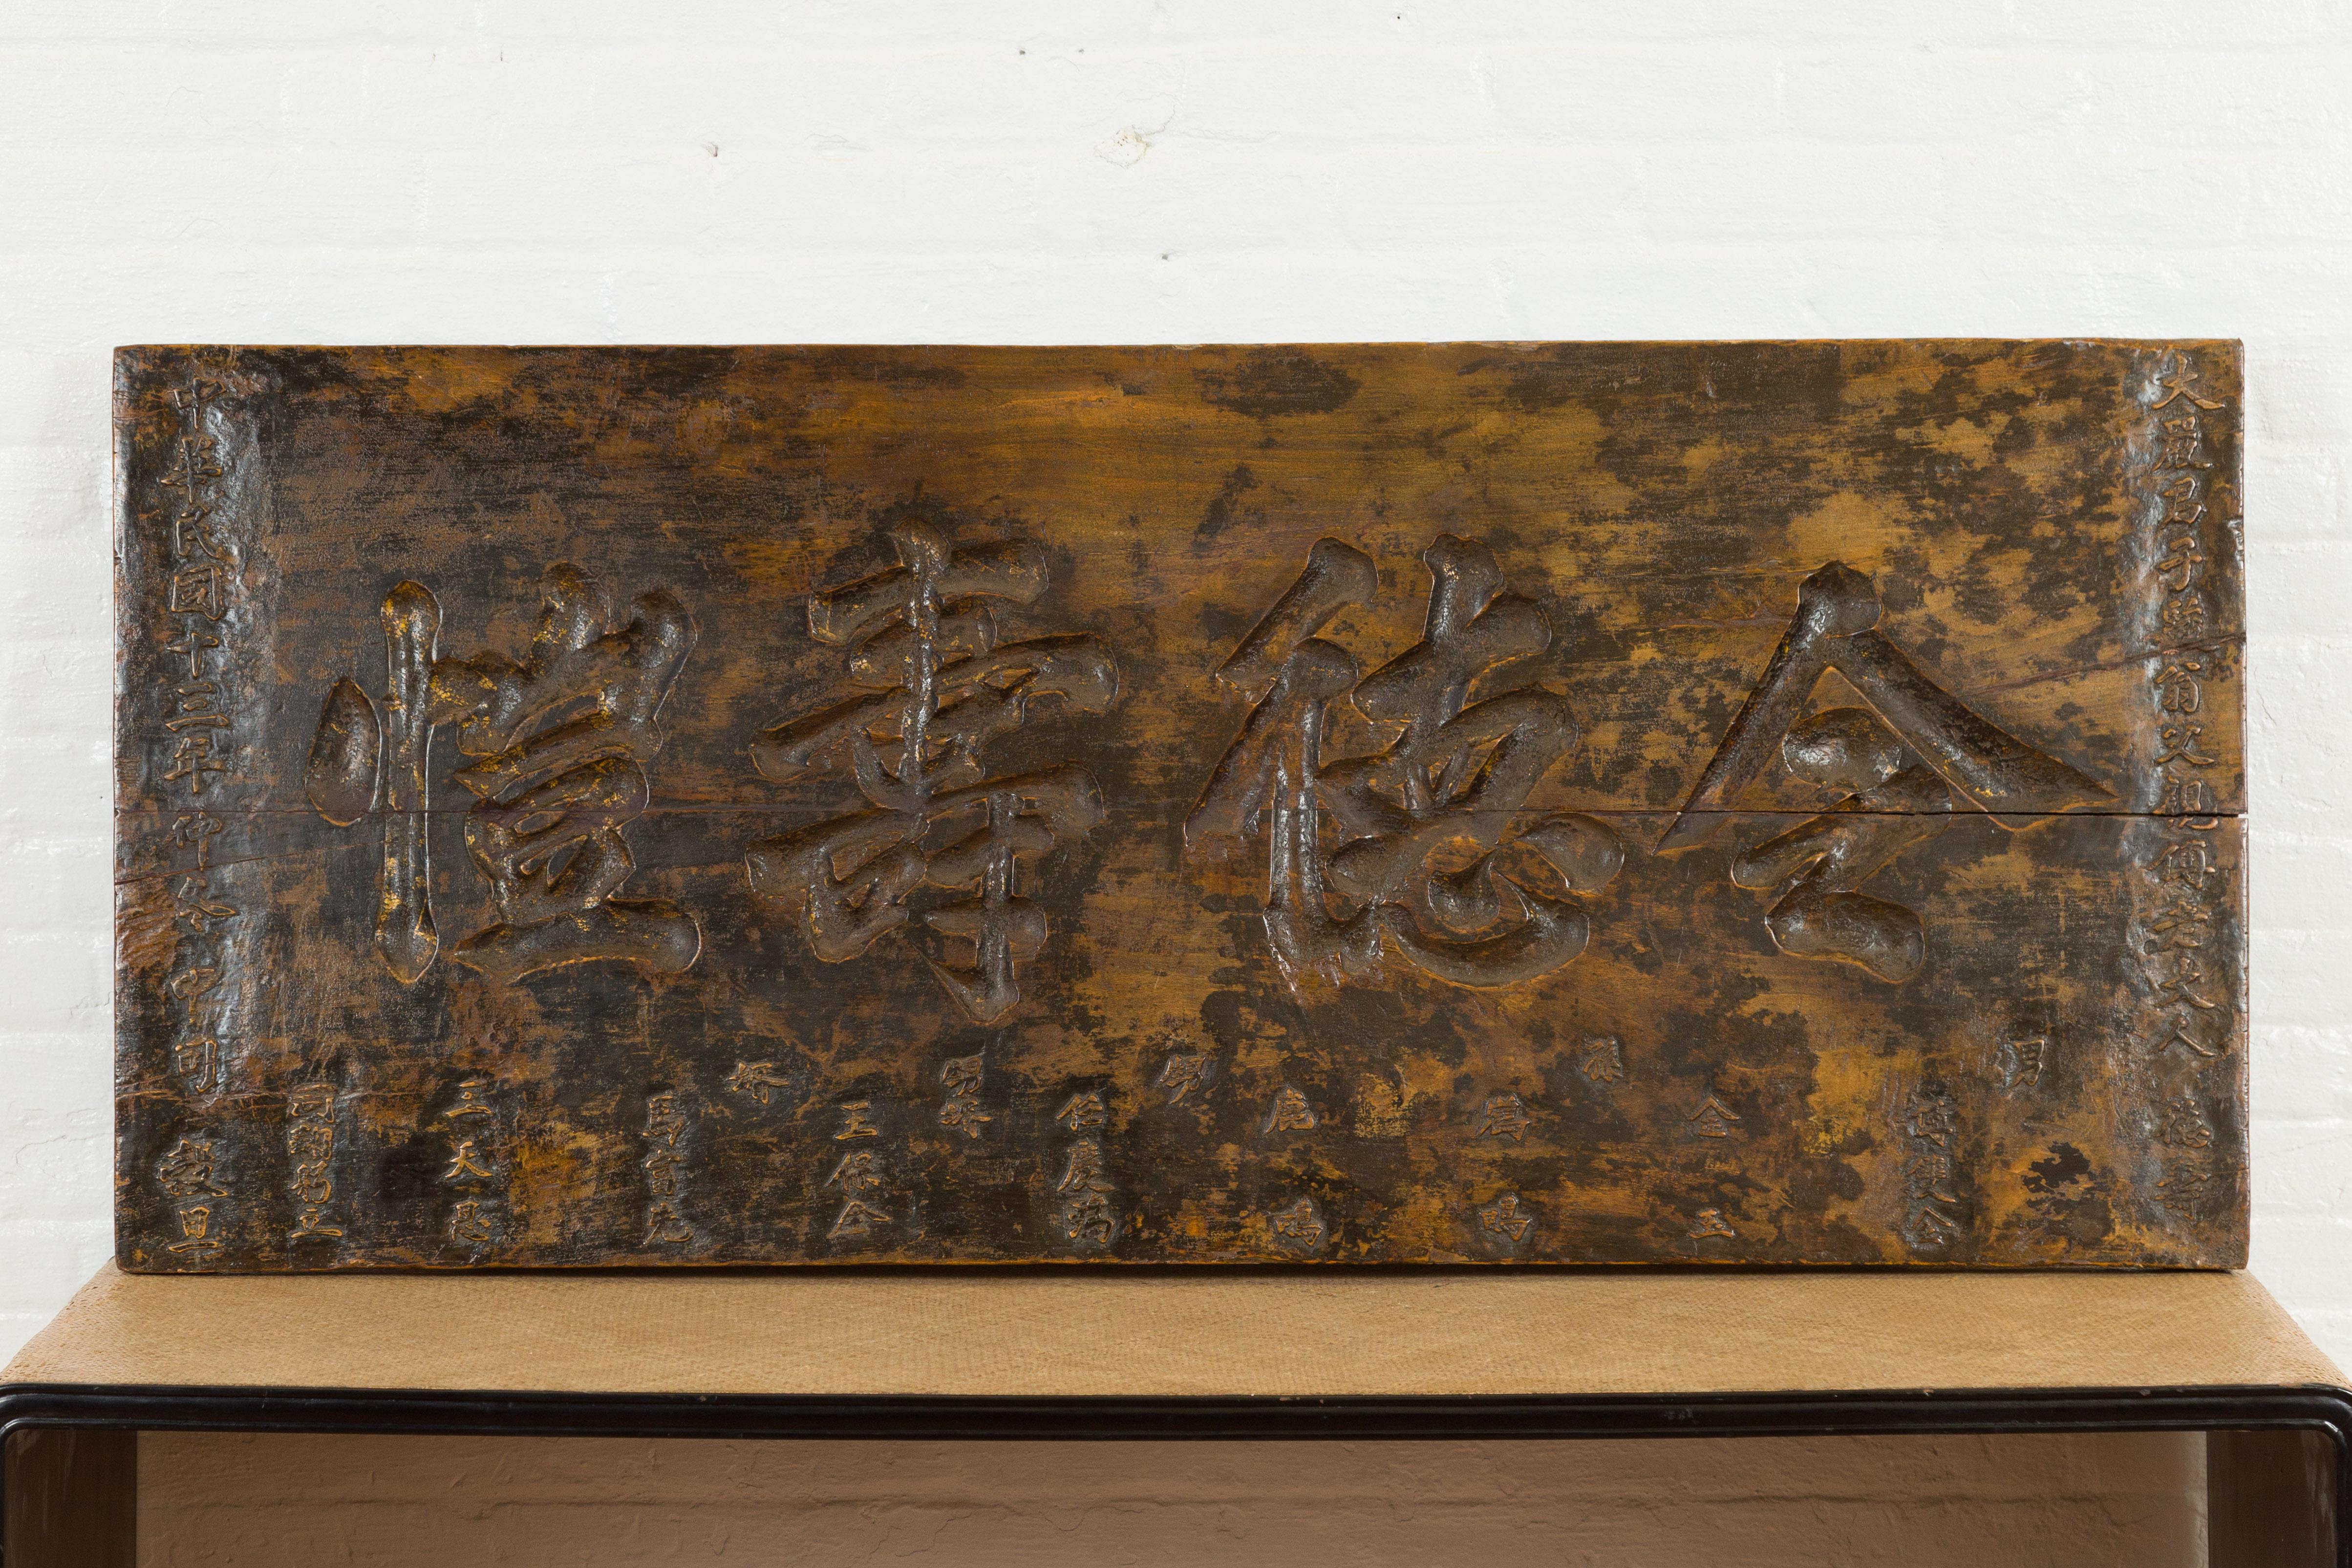 A rectangular Chinese shop sign panel from the 19th century with calligraphy and distressed dark brown patina. Crafted in China, this shop sign features a clean rectangular silhouette, simply adorned with calligraphy. Boasting a dark patina with